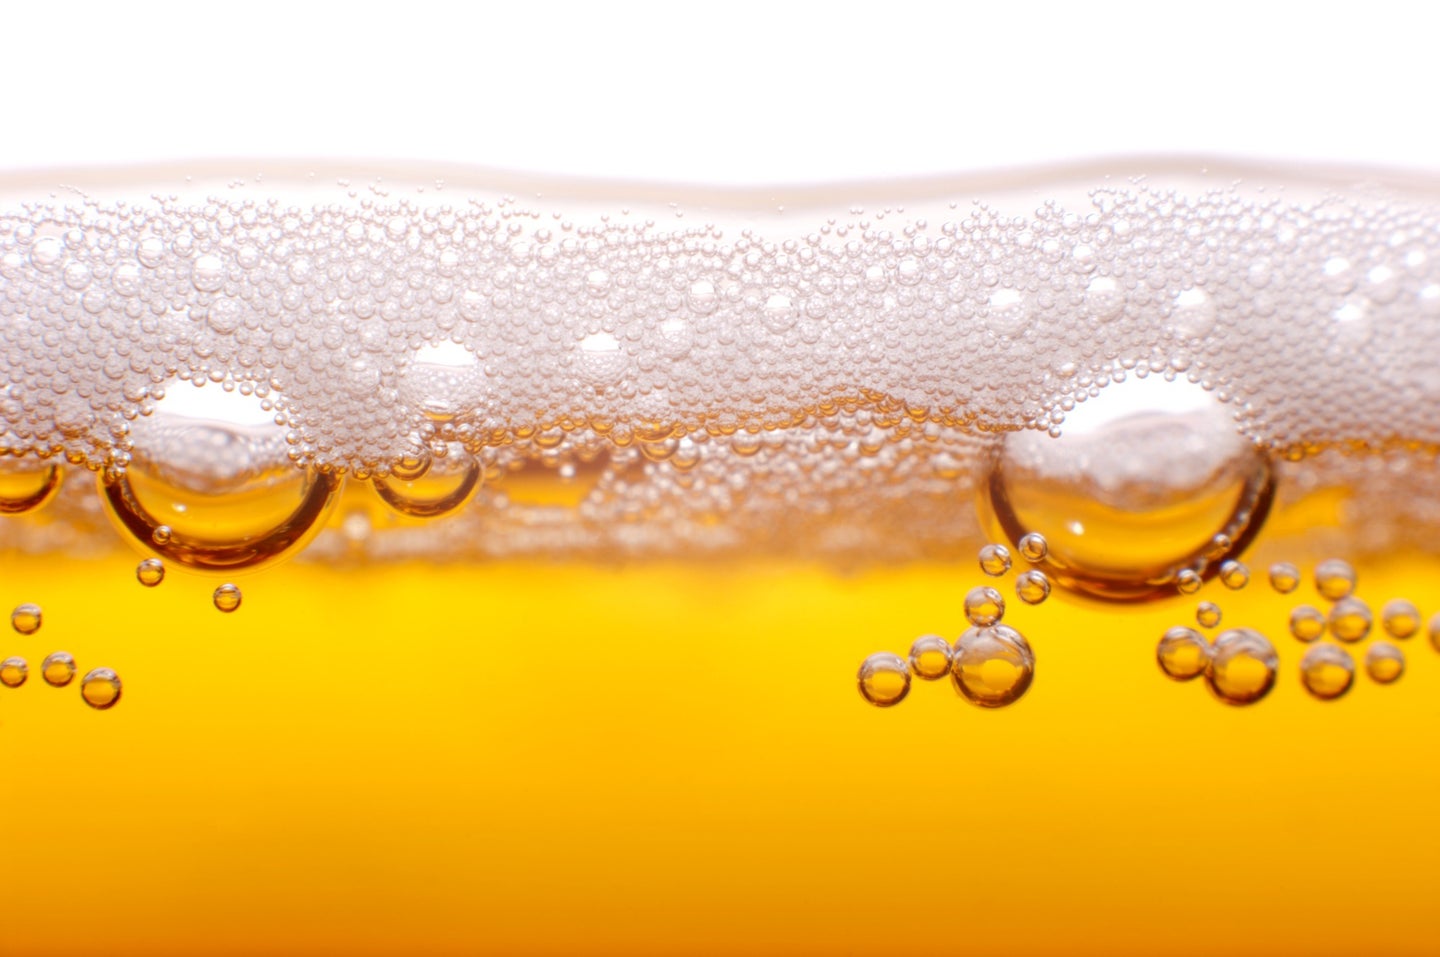 Beer is one of the oldest drinks in world history.